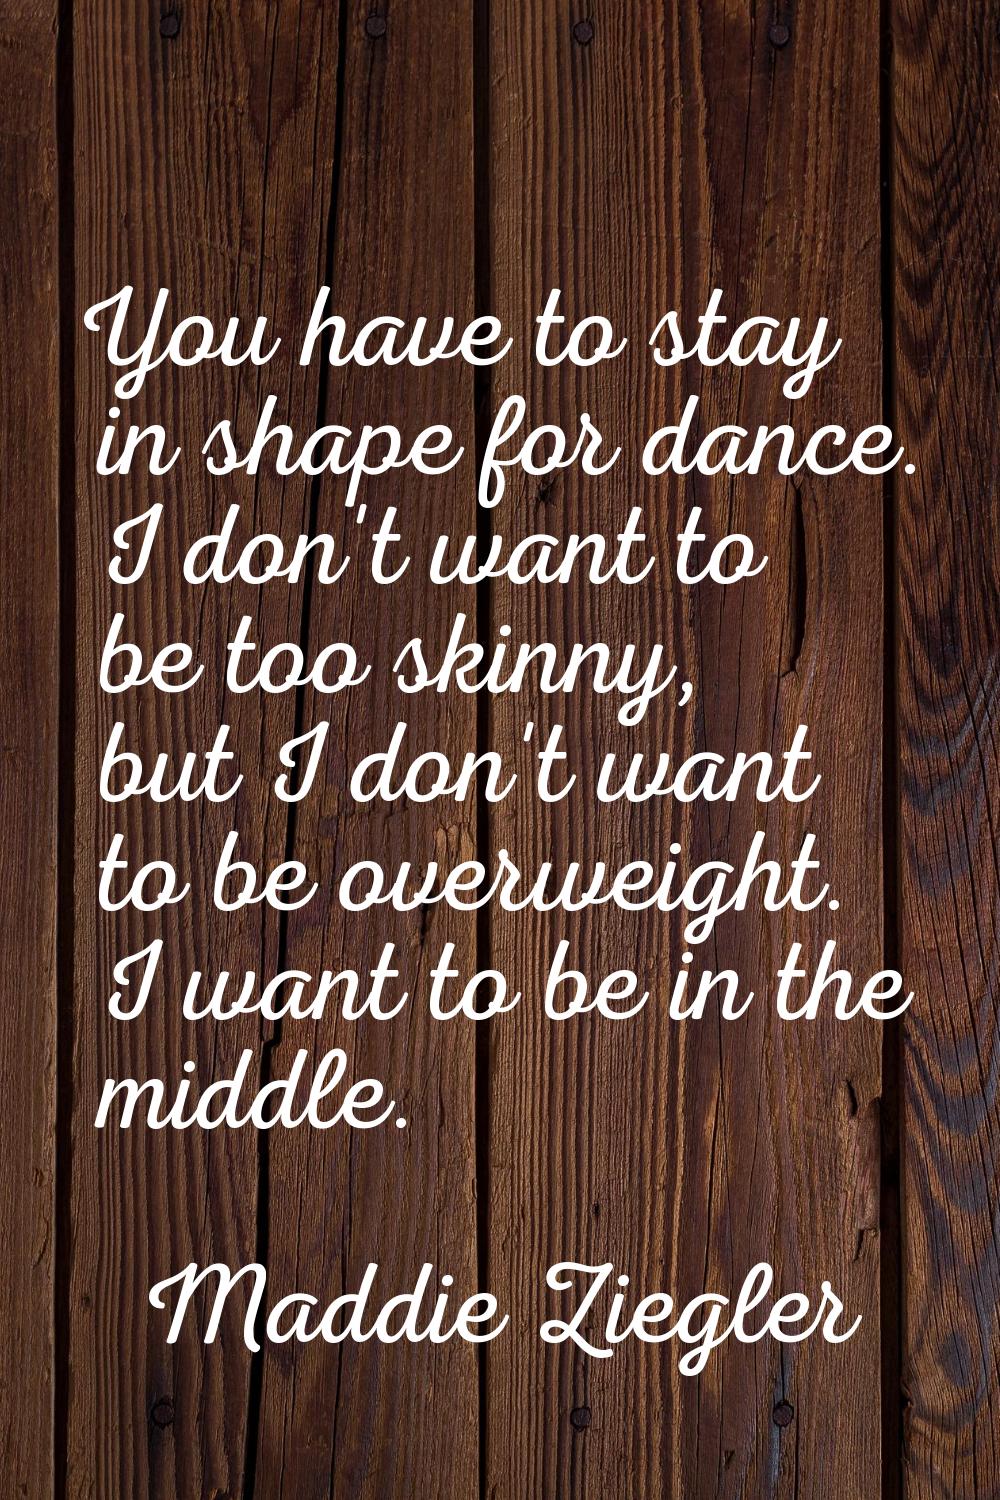 You have to stay in shape for dance. I don't want to be too skinny, but I don't want to be overweig